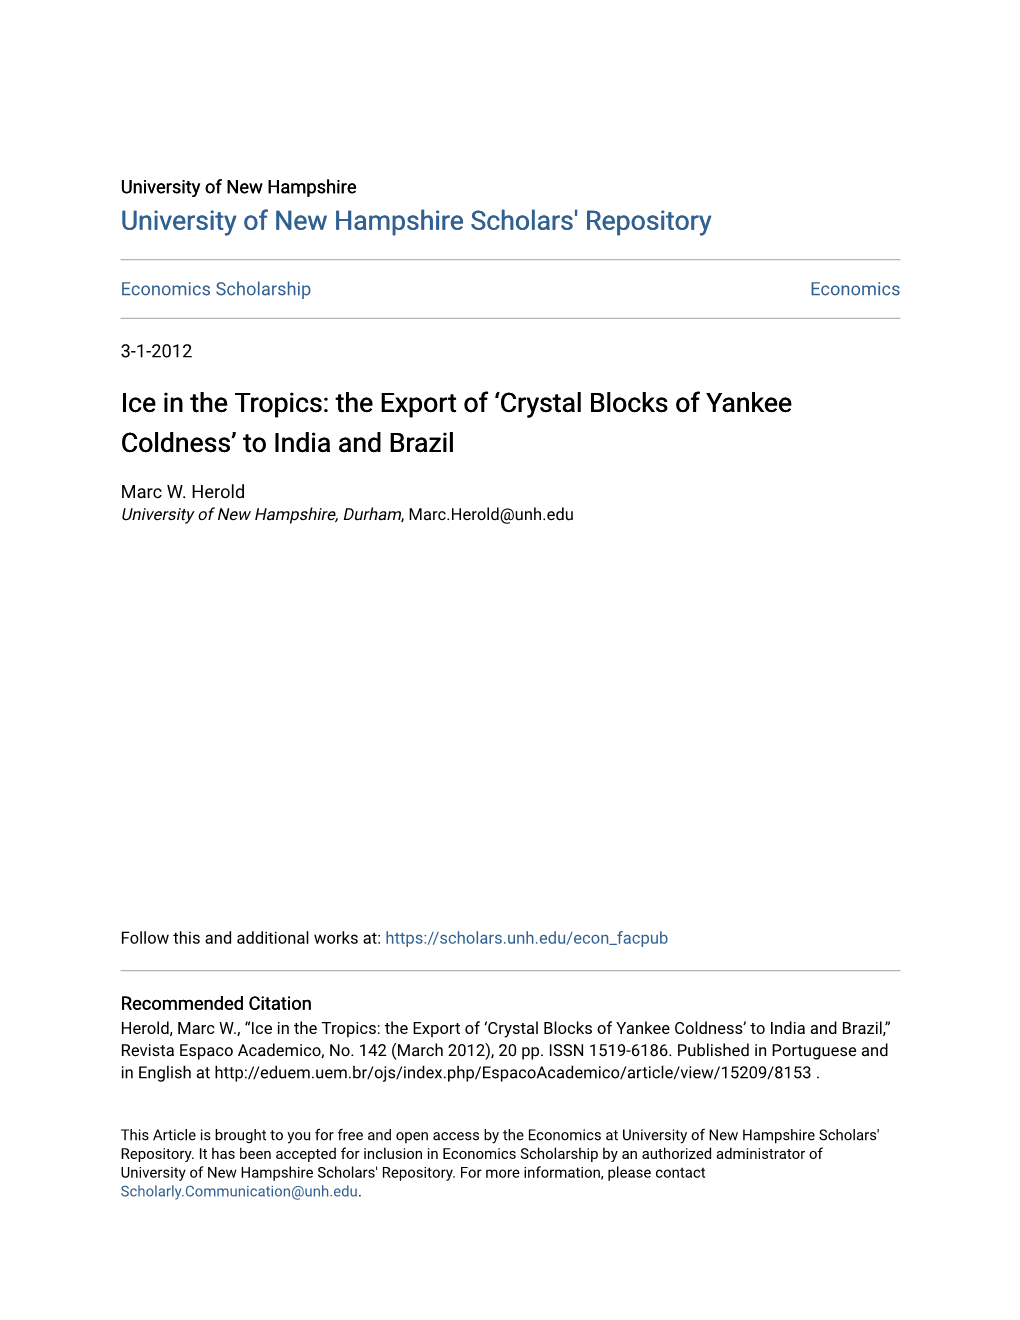 Ice in the Tropics: the Export of ‘Crystal Blocks of Yankee Coldness’ to India and Brazil